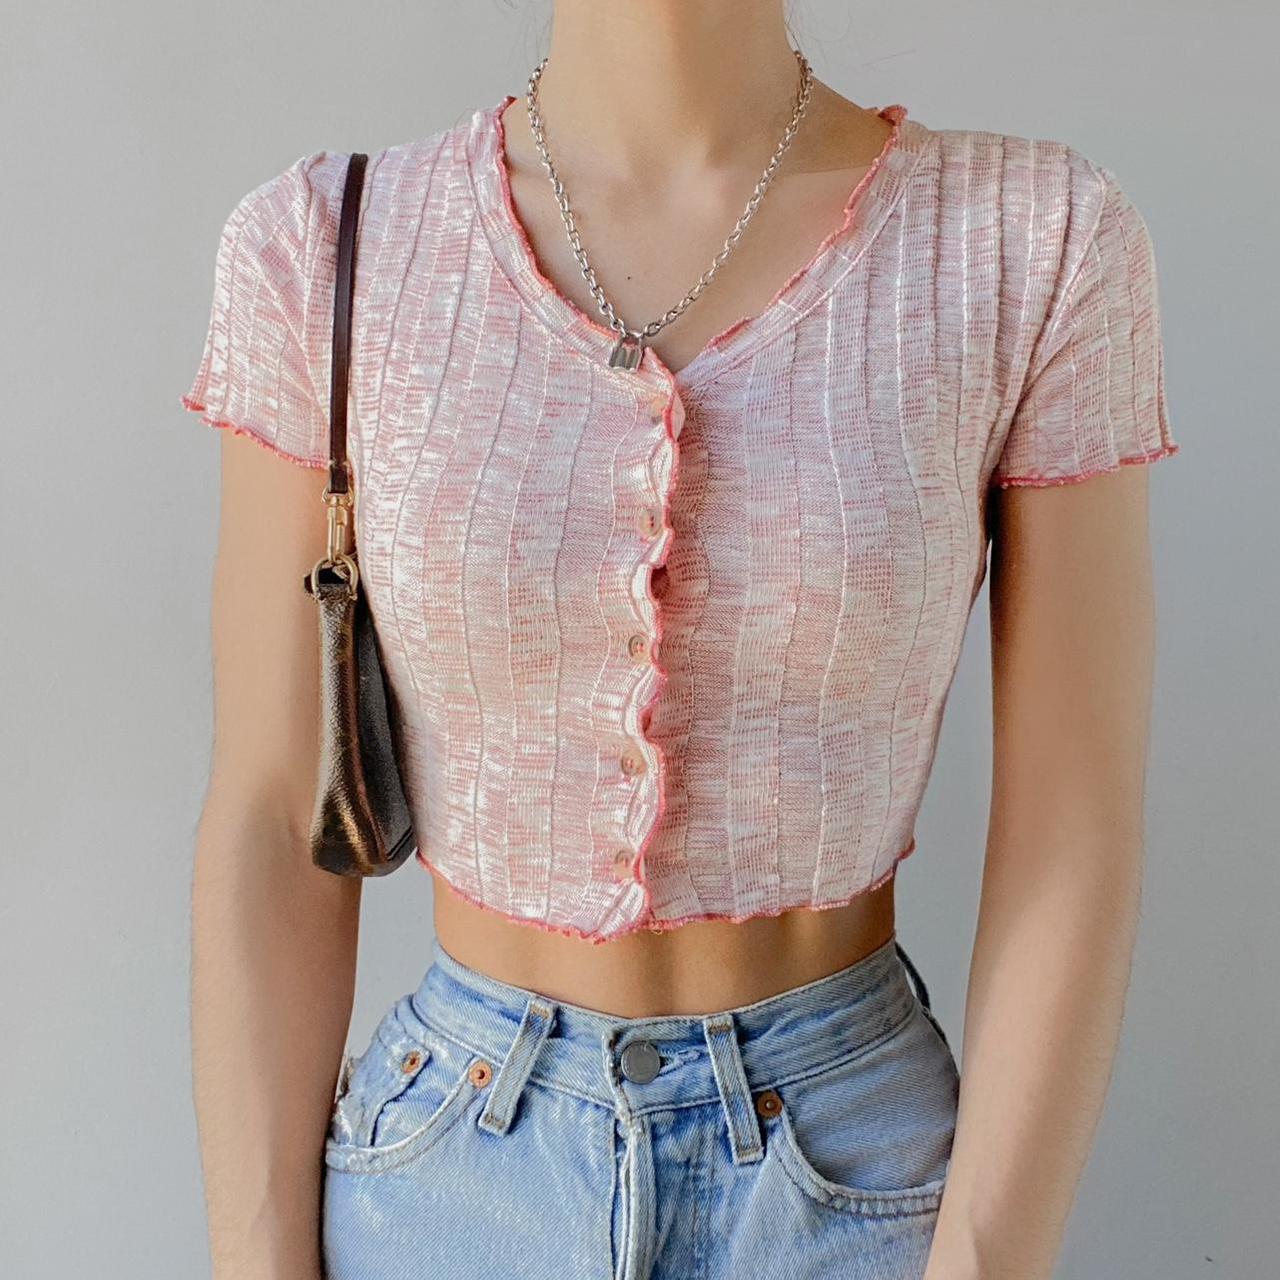 Urban Outfitters Faux Leather Bralette crop top Pink by Out From Under Size  M 10